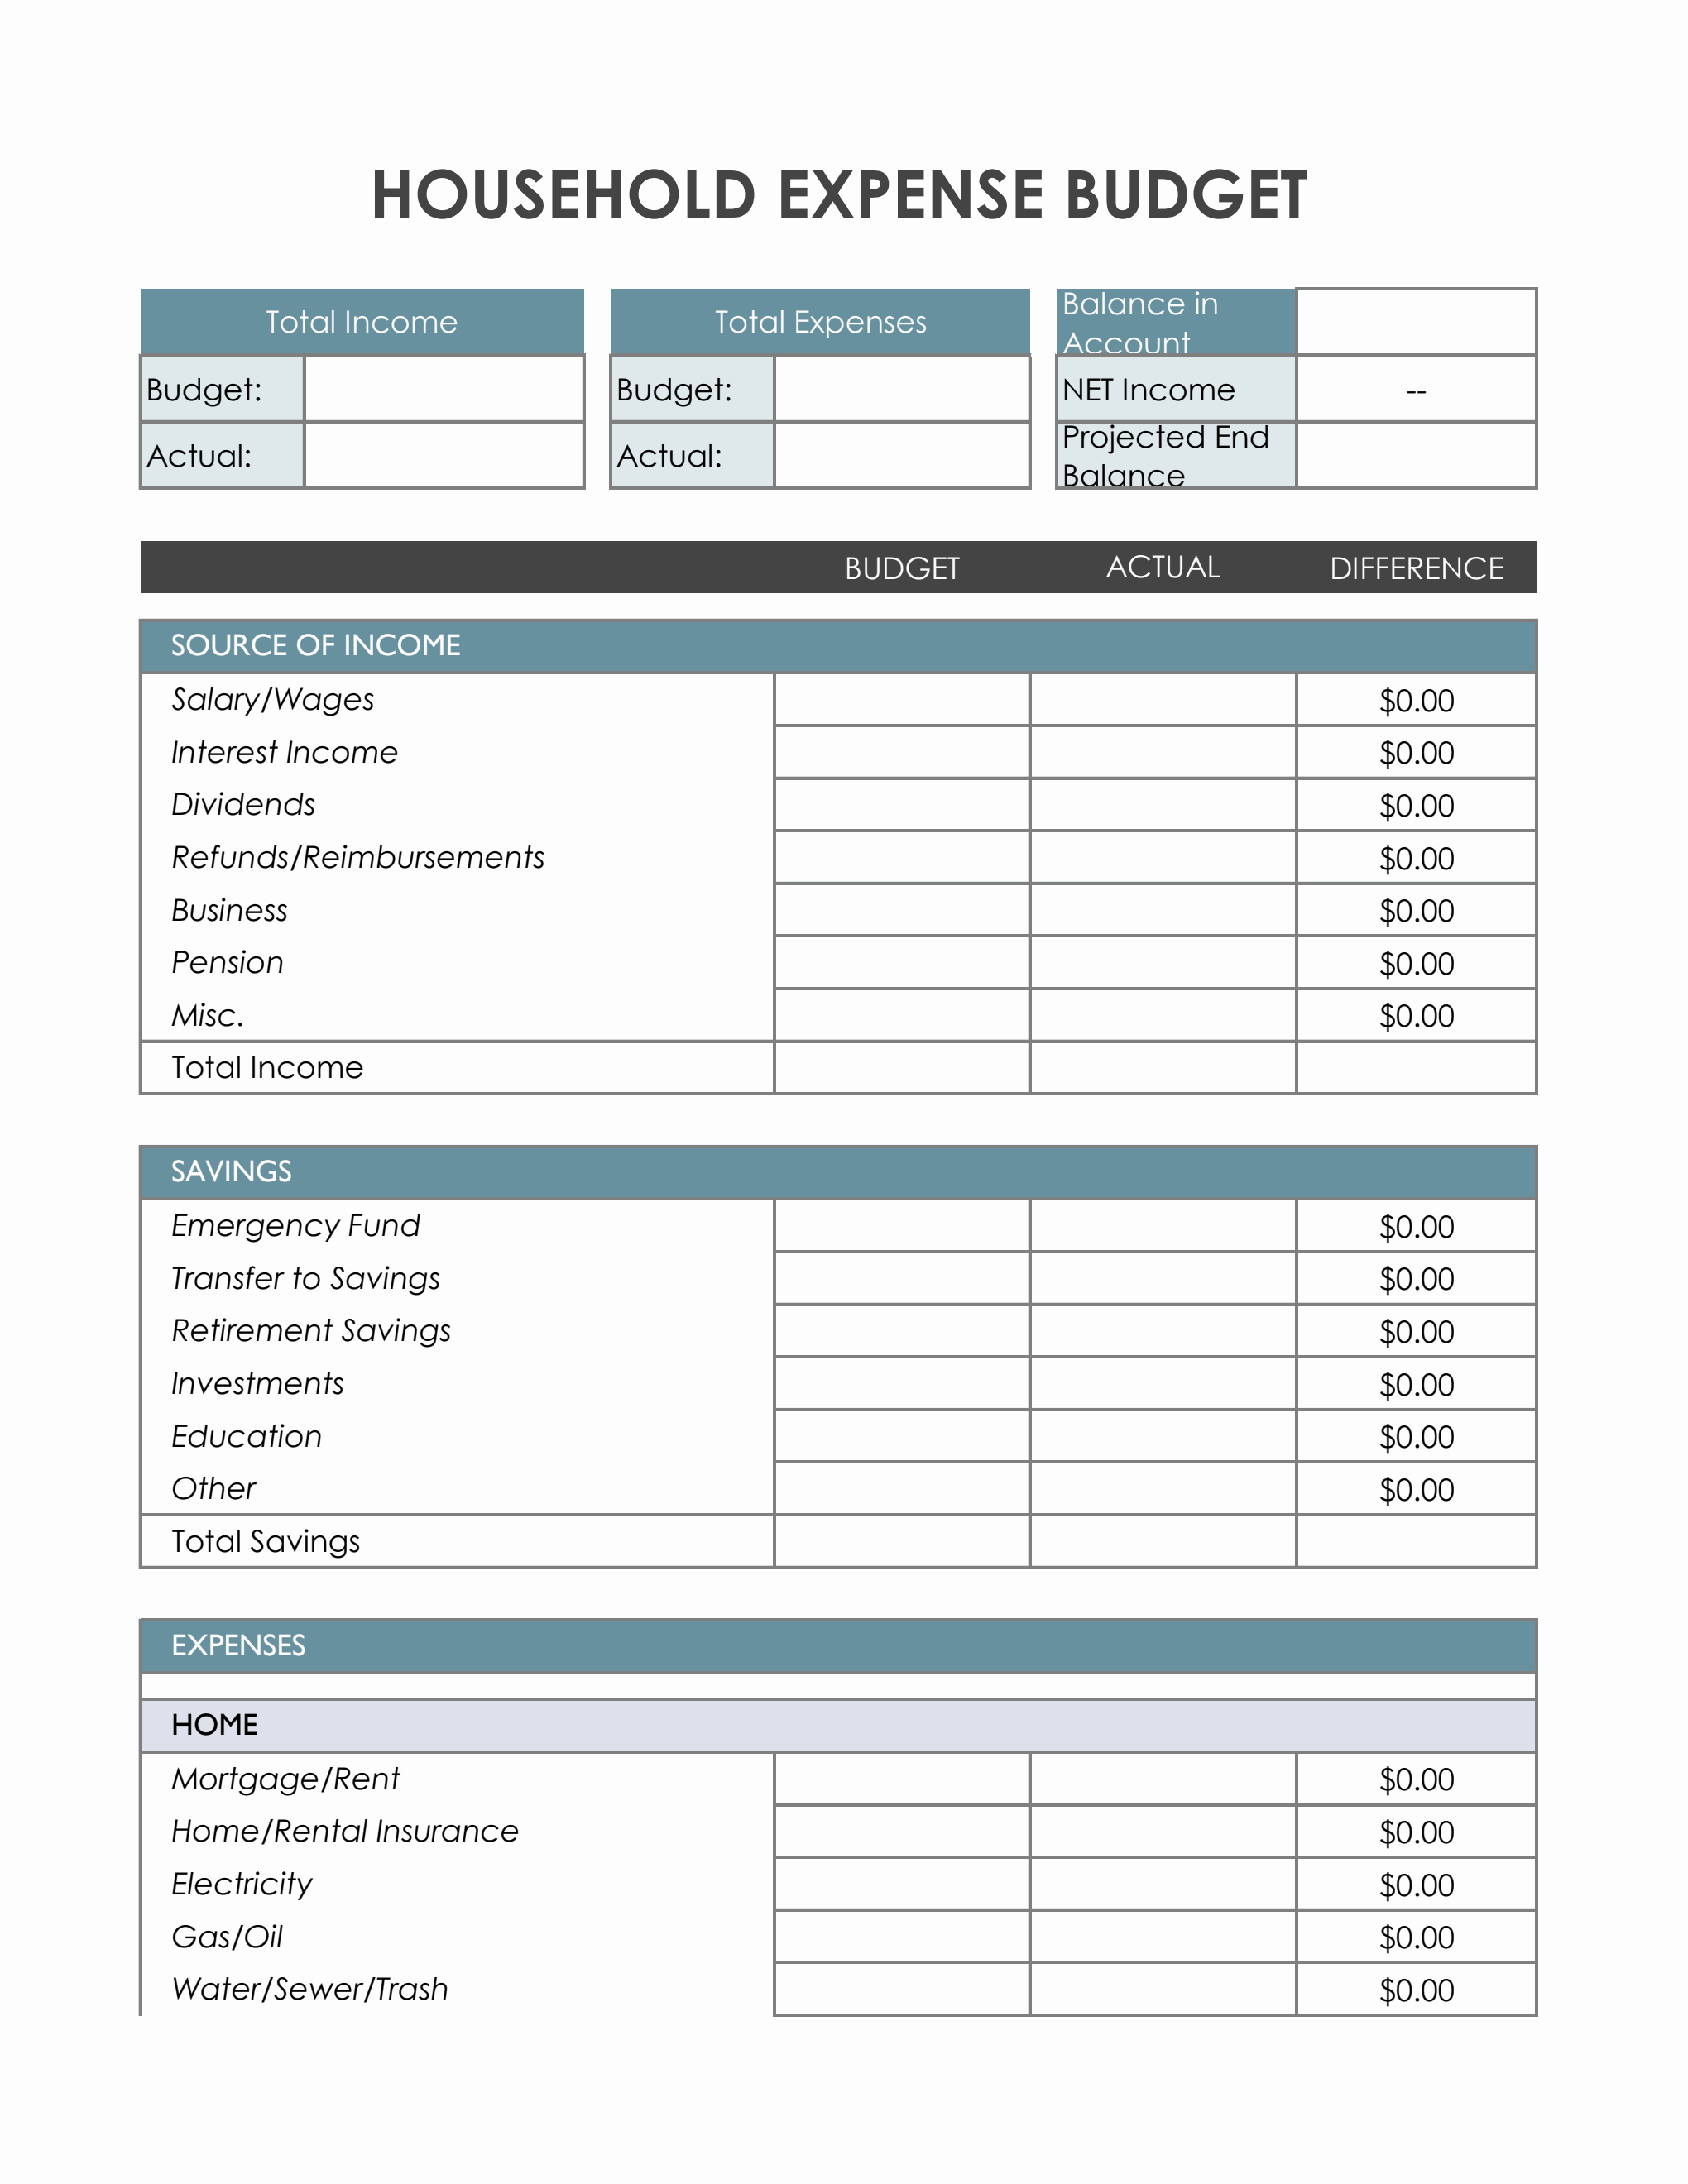 Household Expense Budget Template in Excel